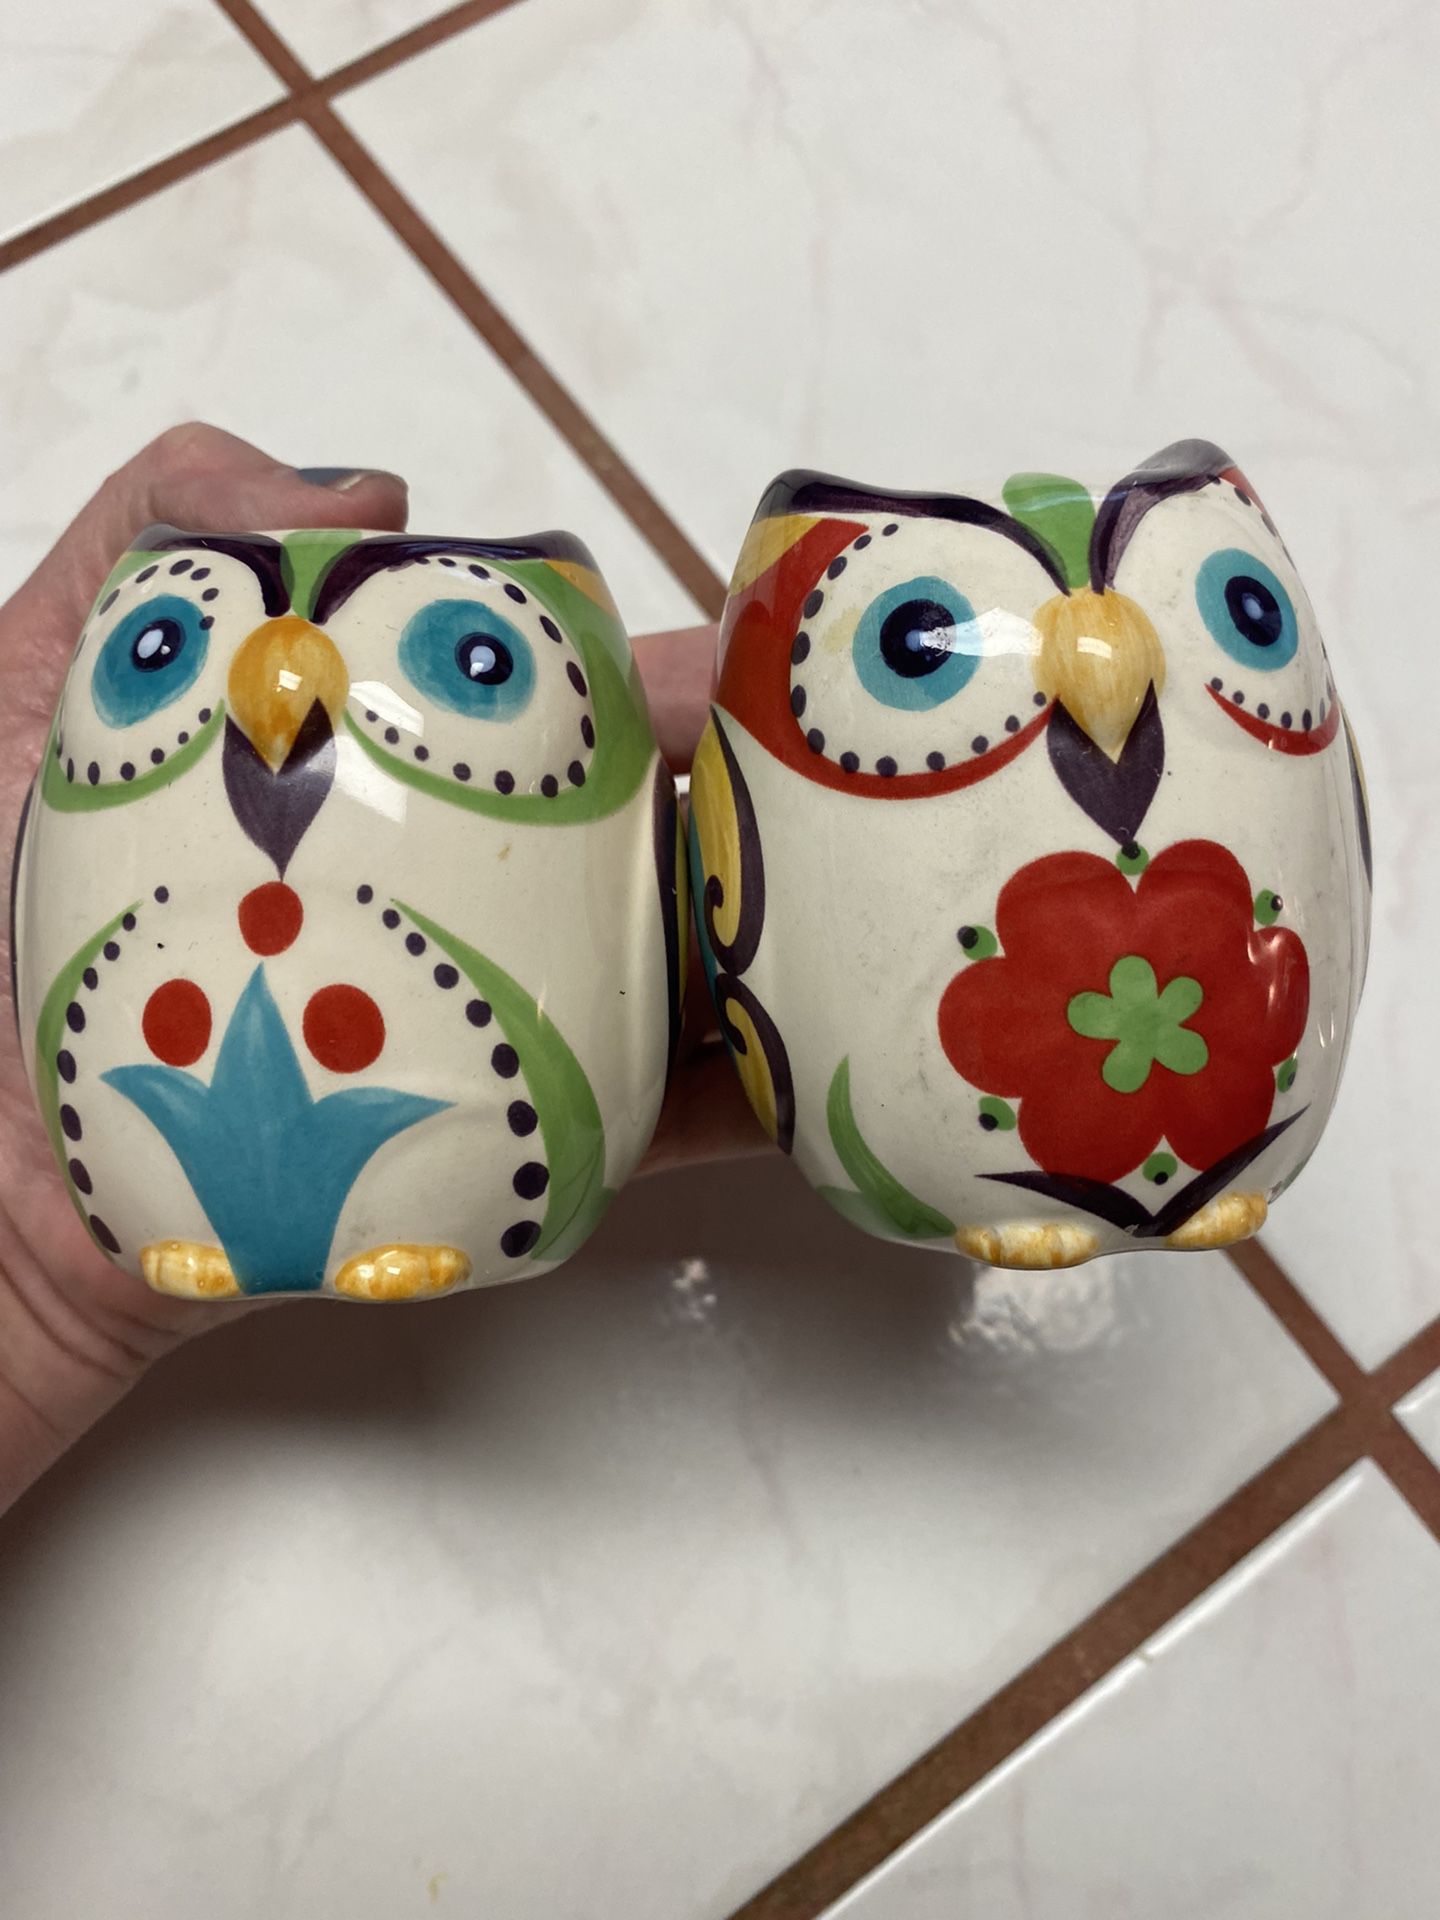 Gorgeous Owl Salt and Pepper Shakers